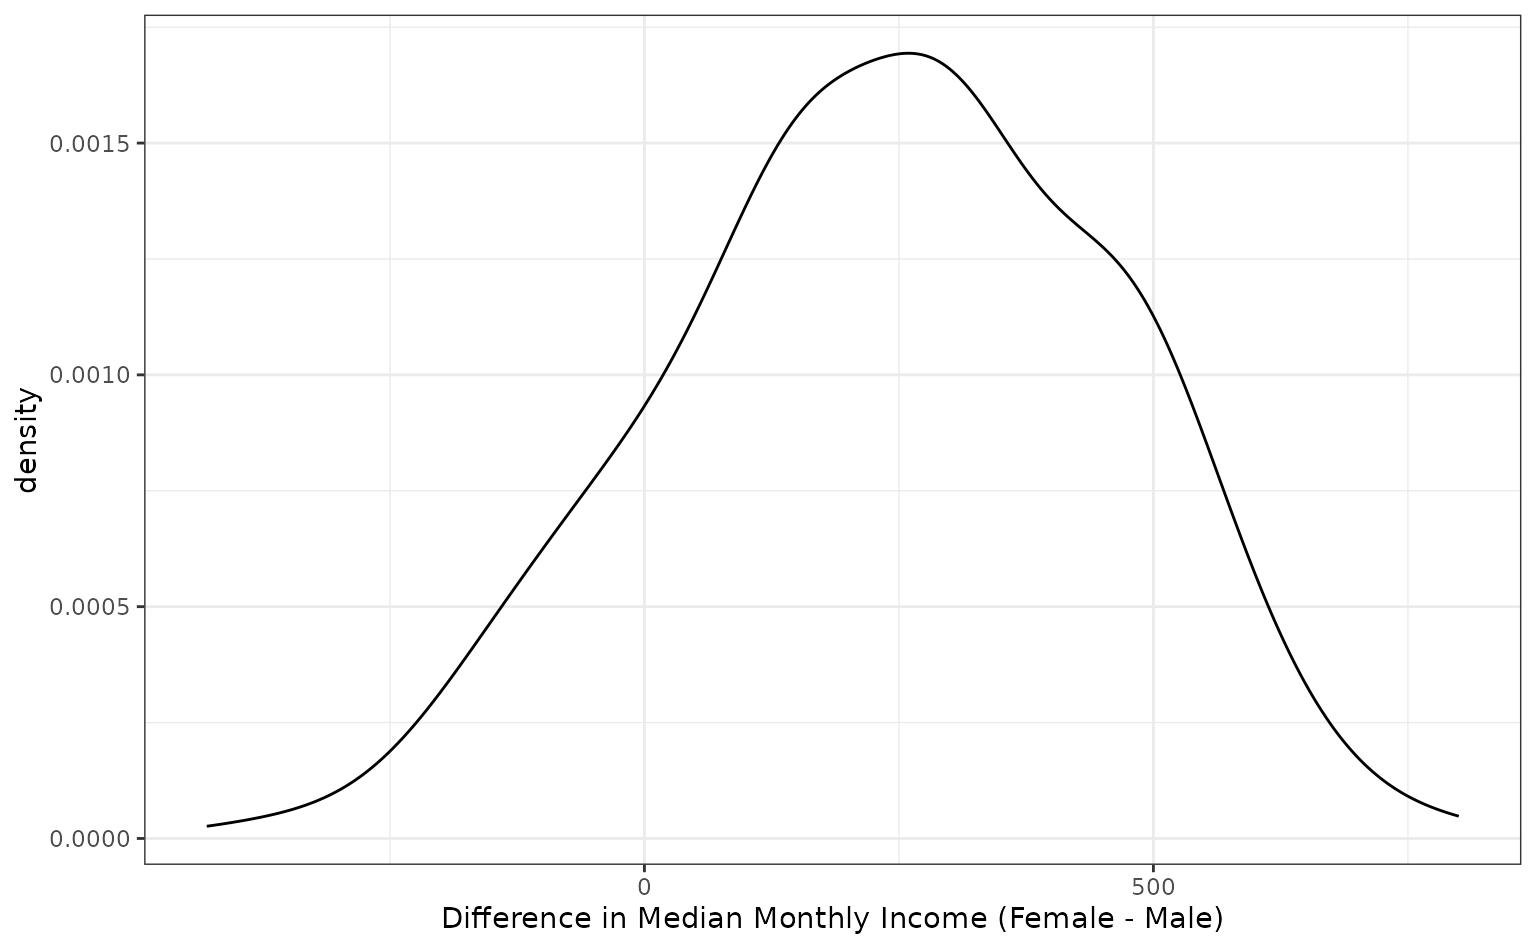 The bootstrap distribution of the differences in median monthly income: it is slightly bimodal and left-skewed.